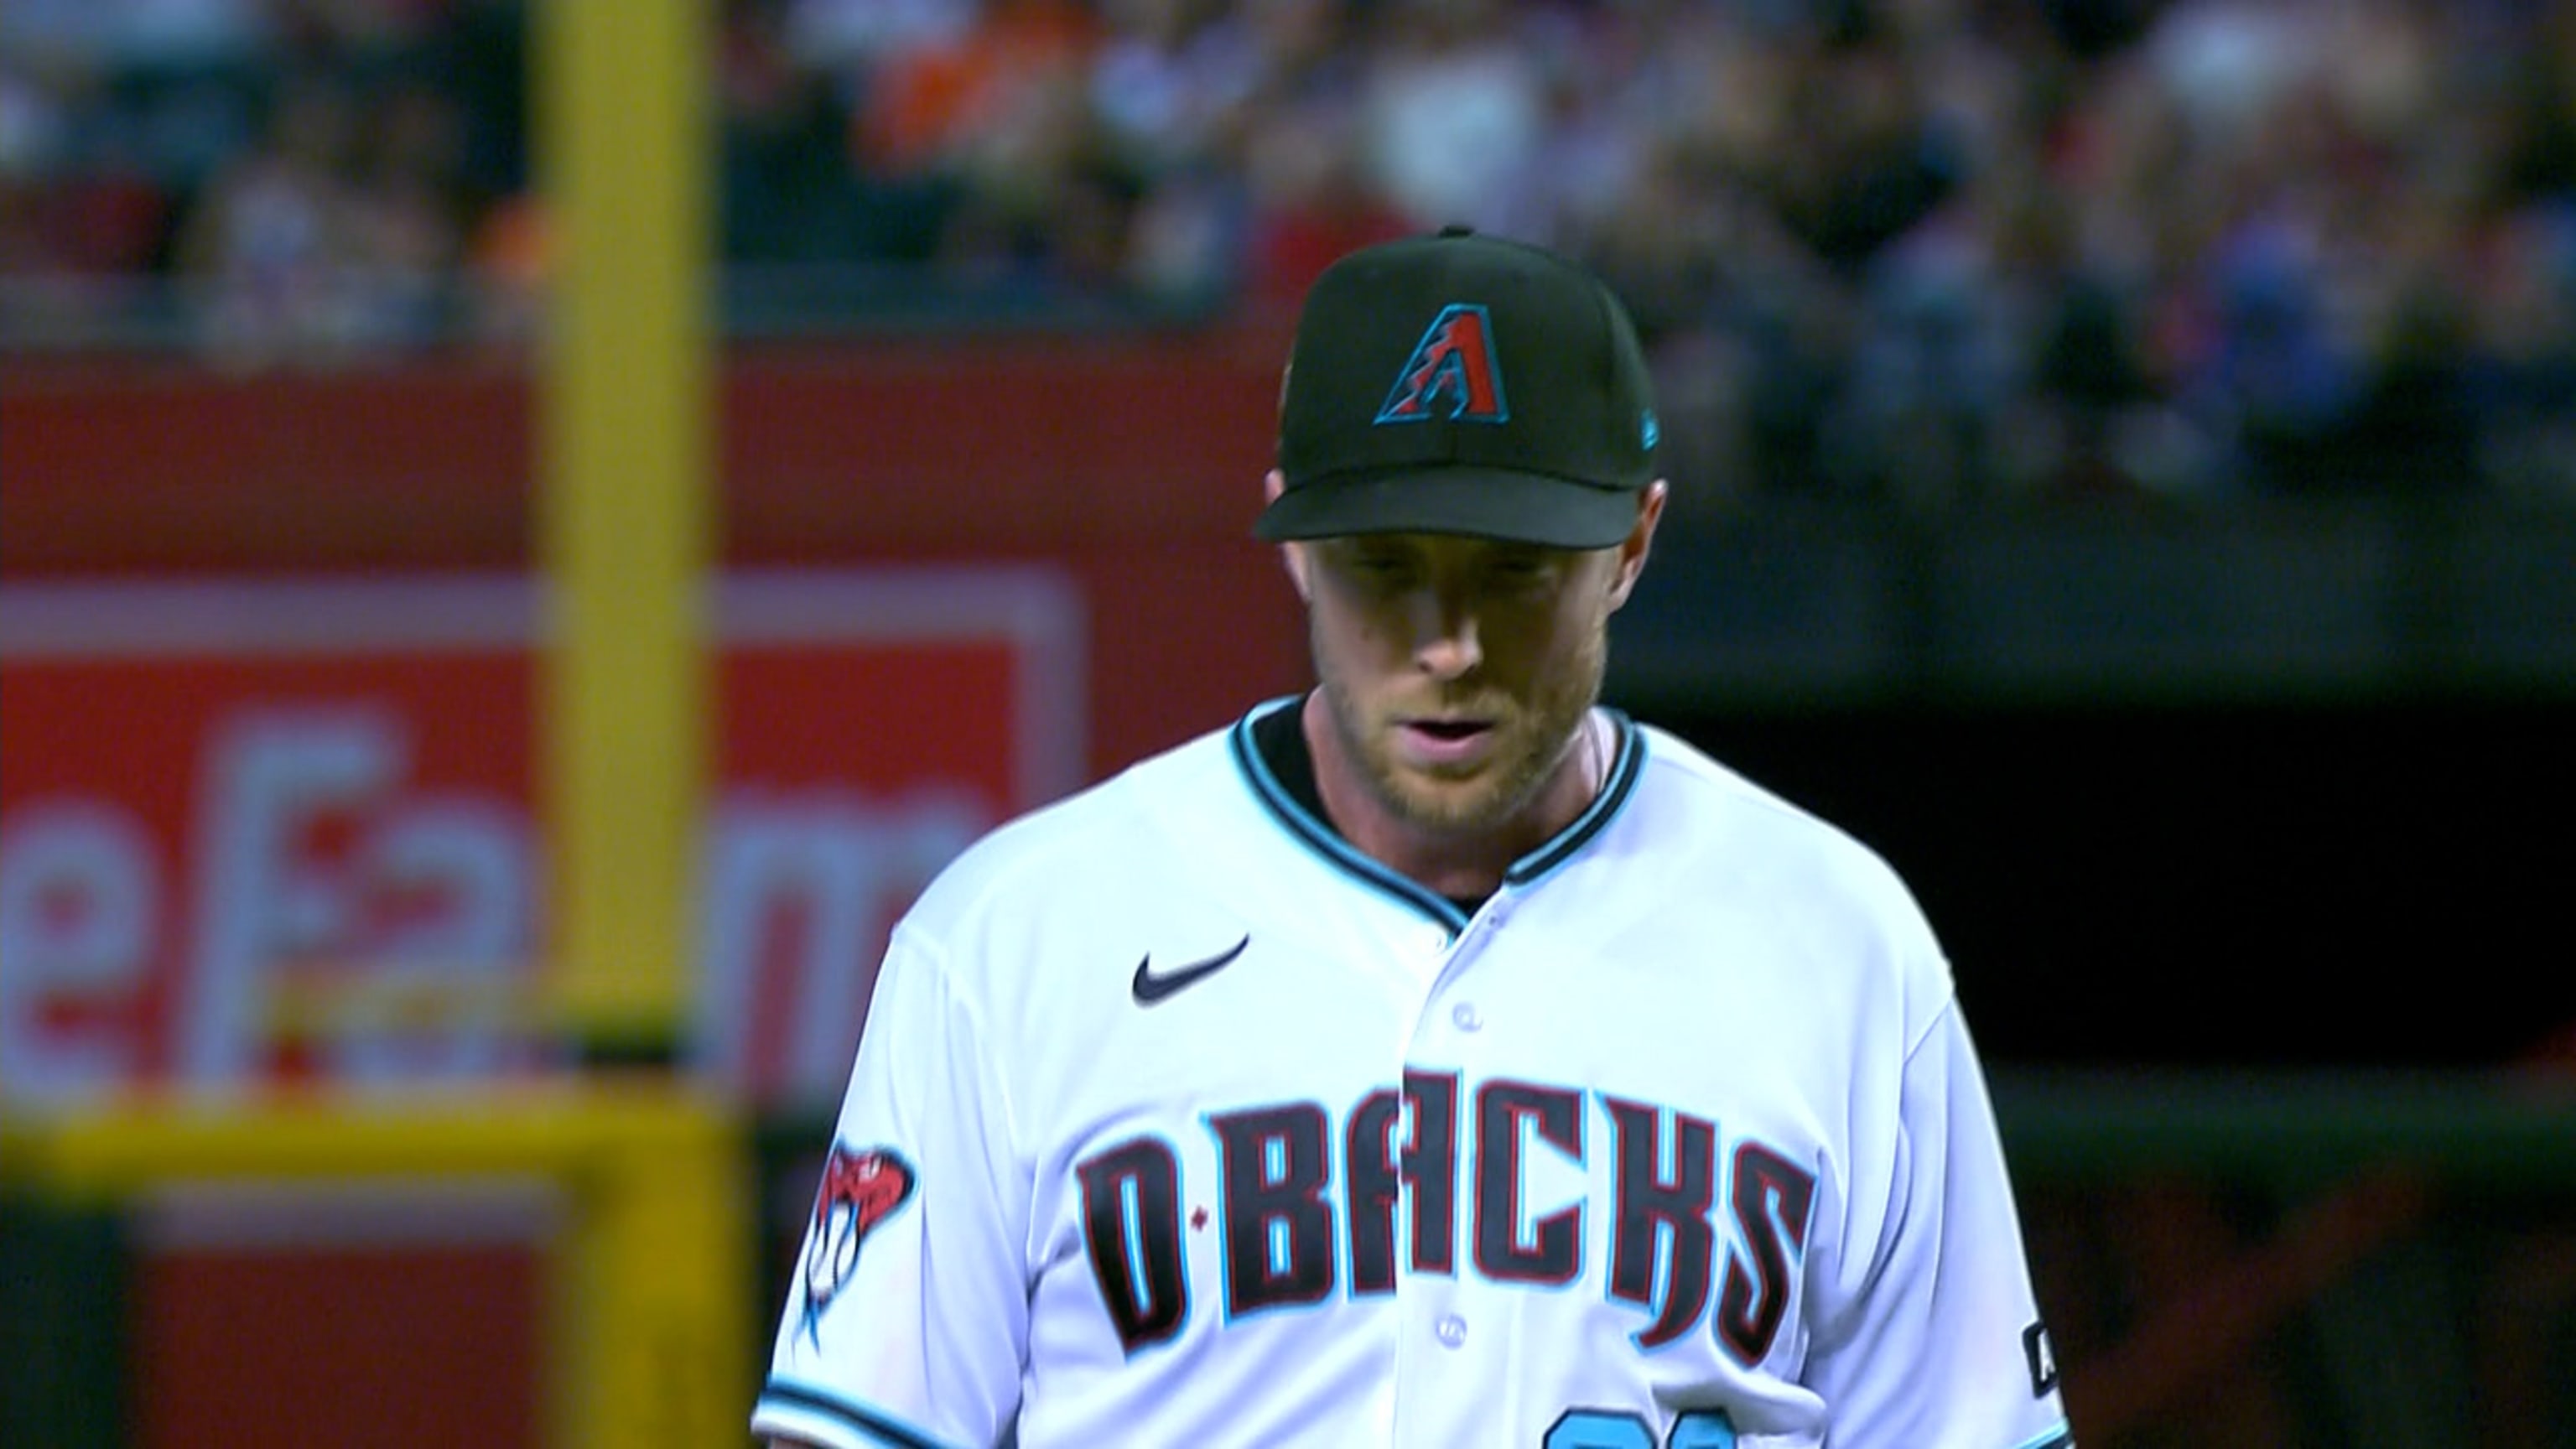 D-backs turn two after review, 07/11/2022